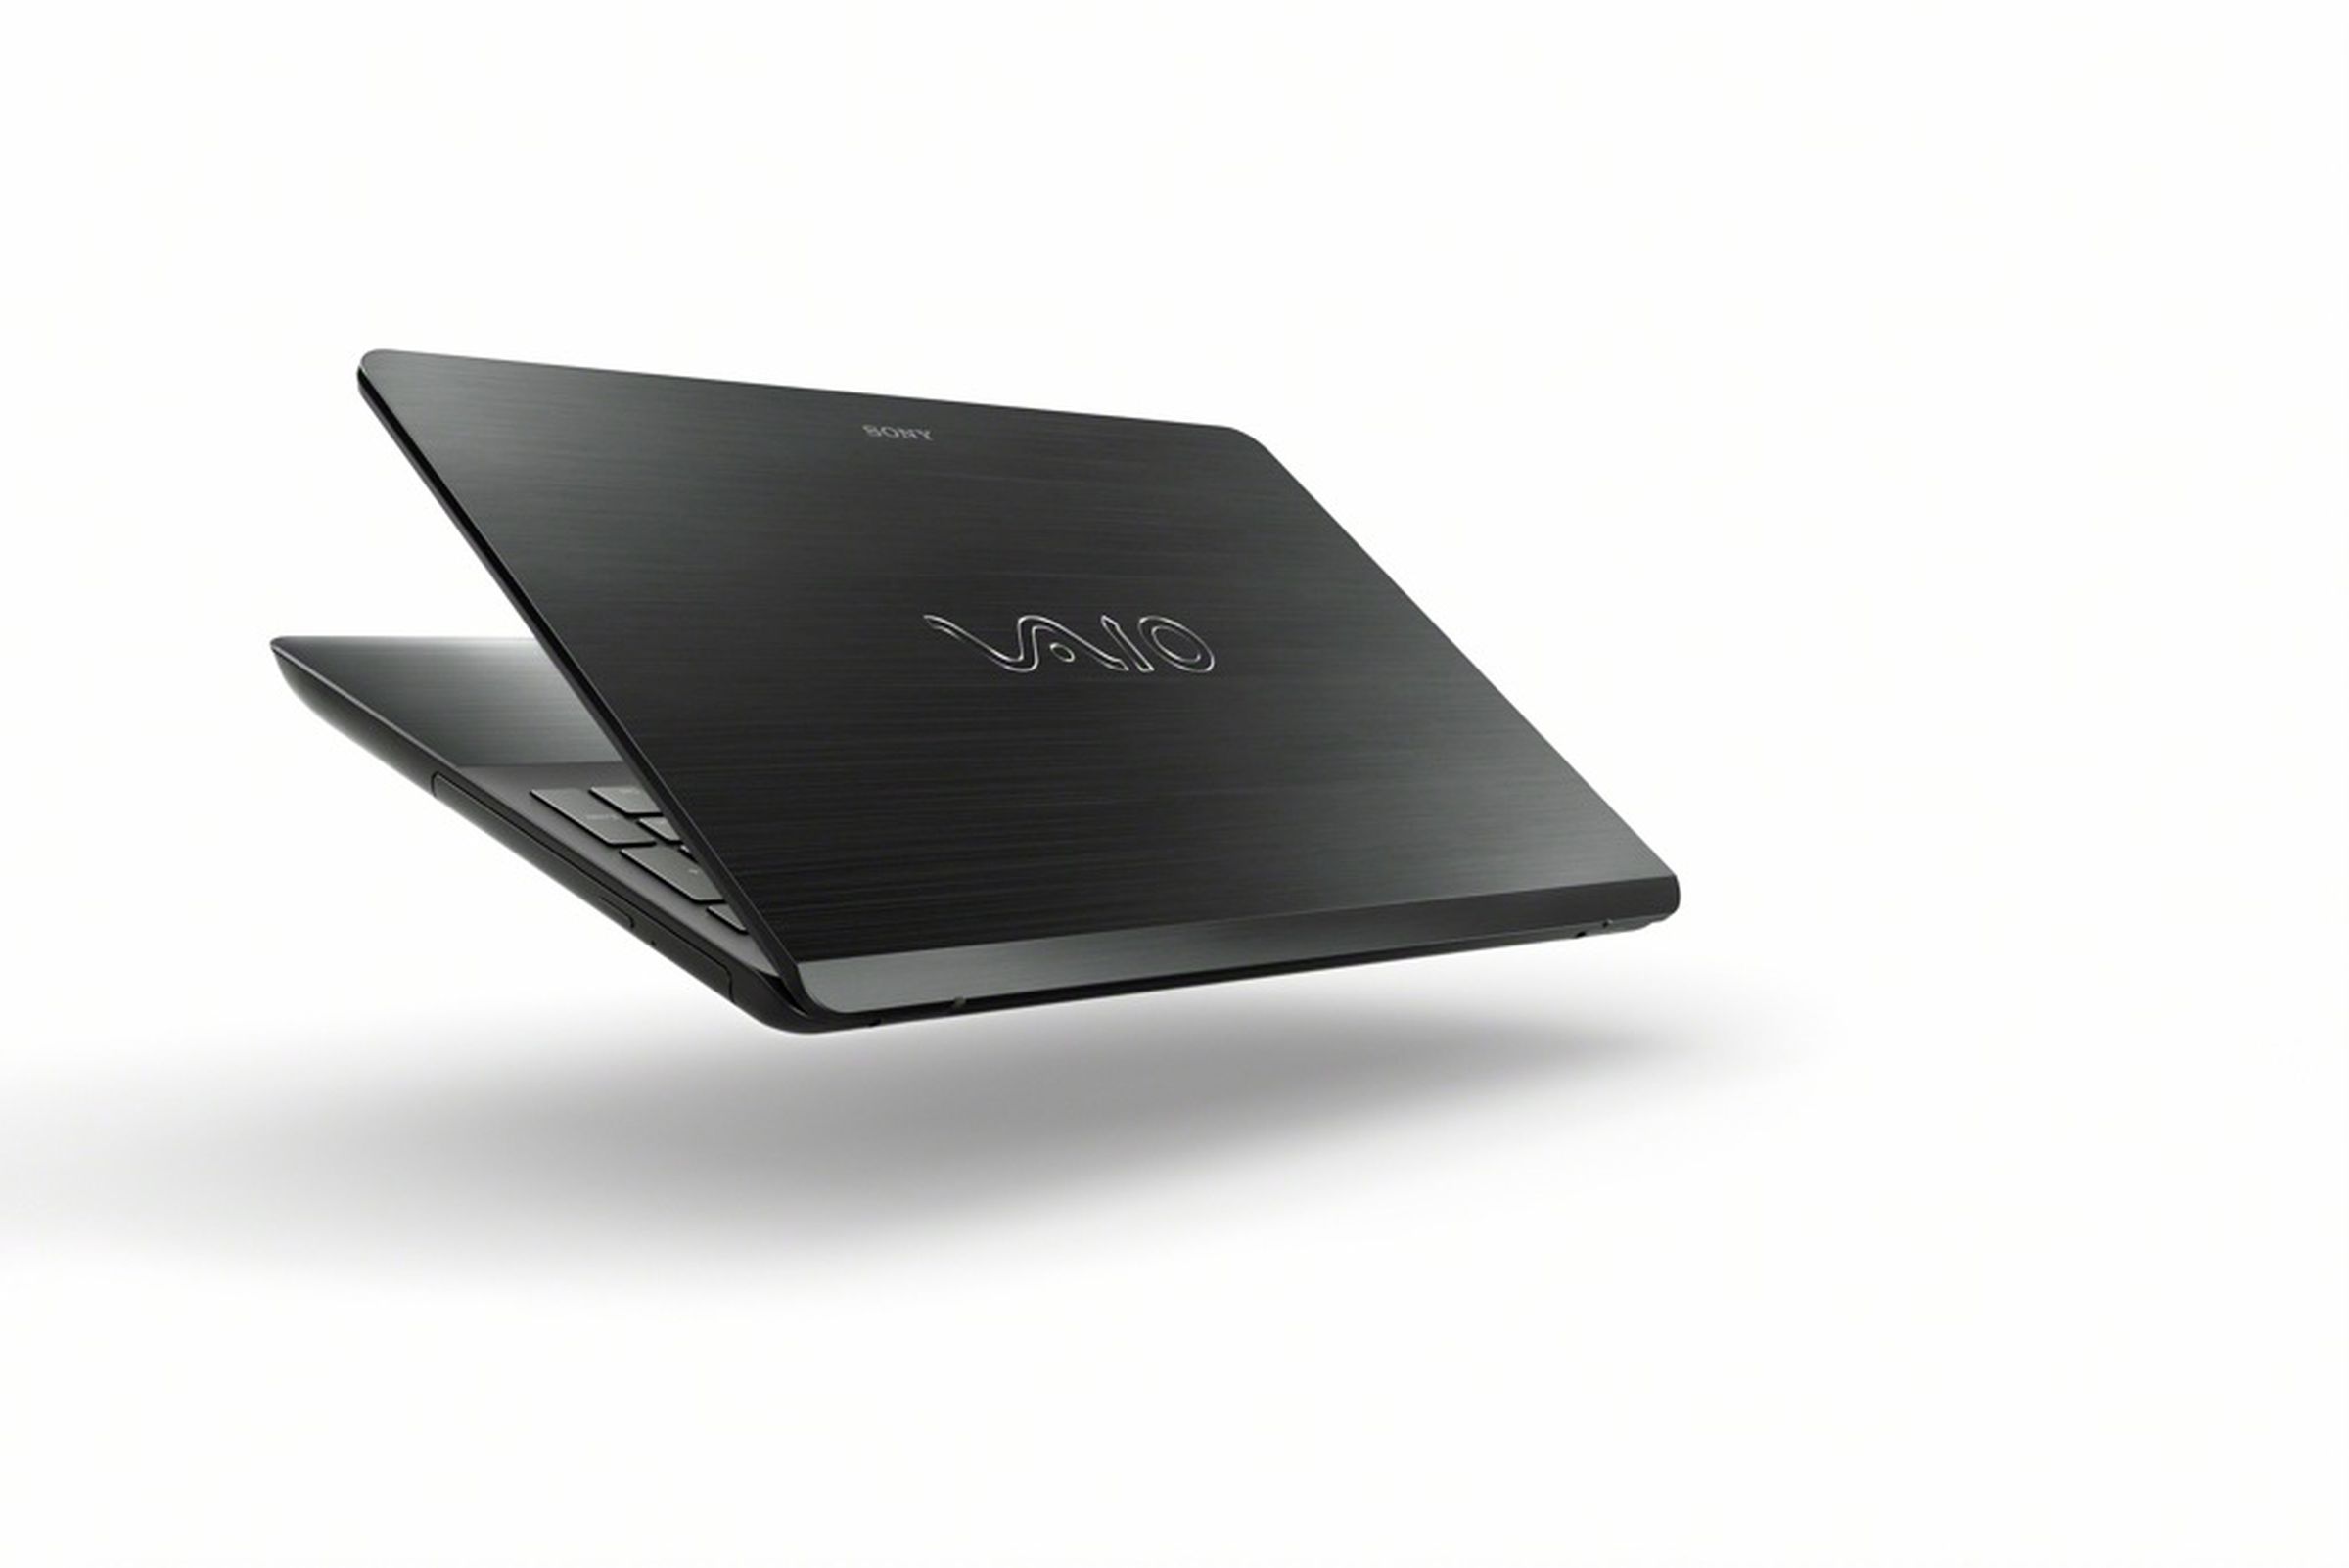 Sony VAIO Fit pictures